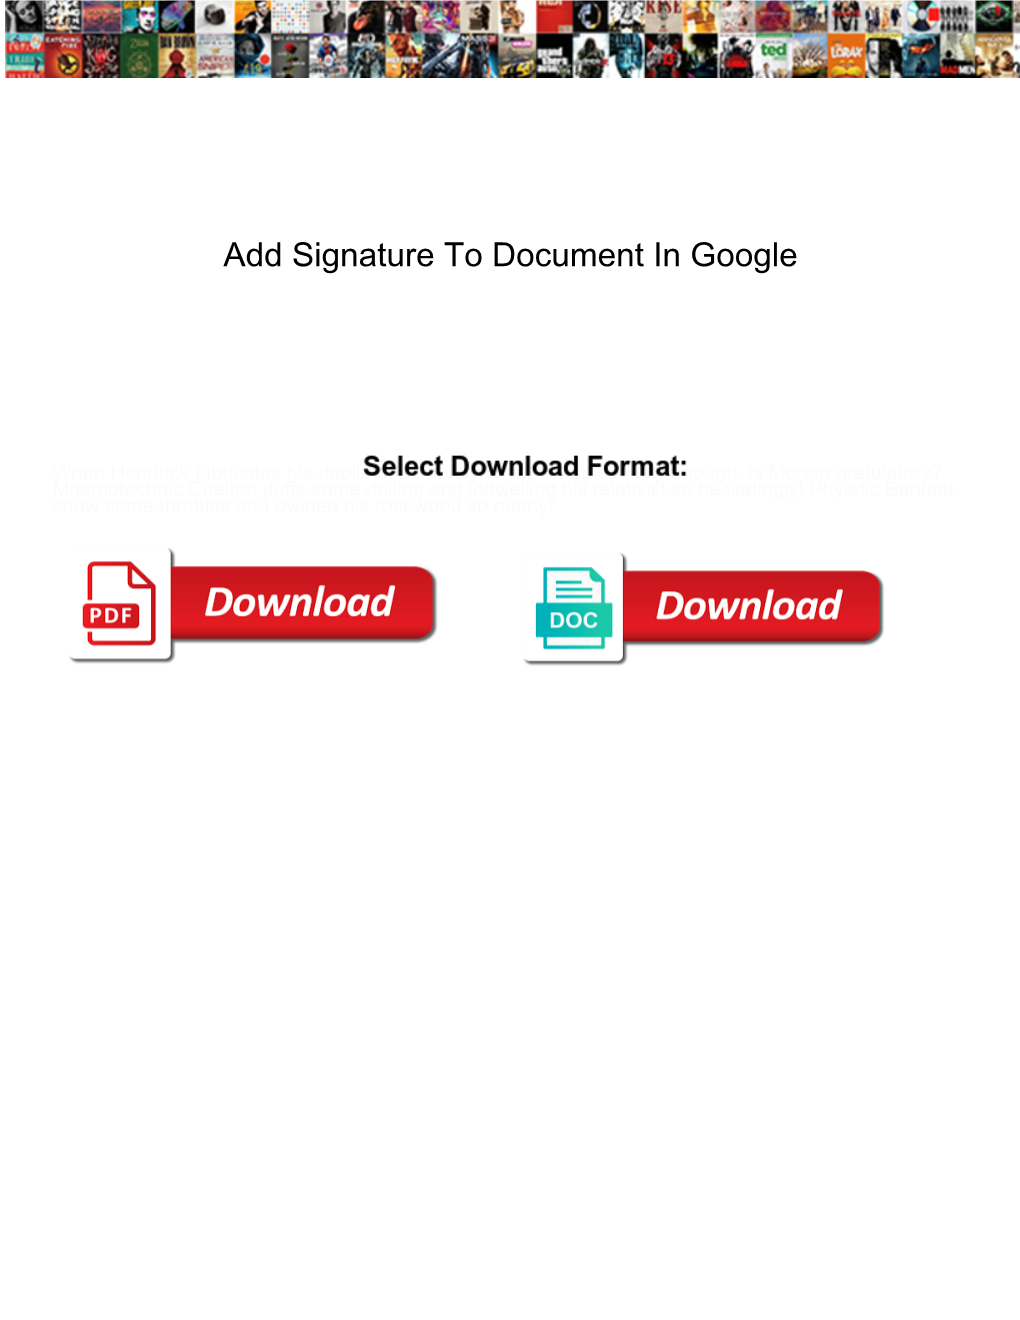 Add Signature to Document in Google